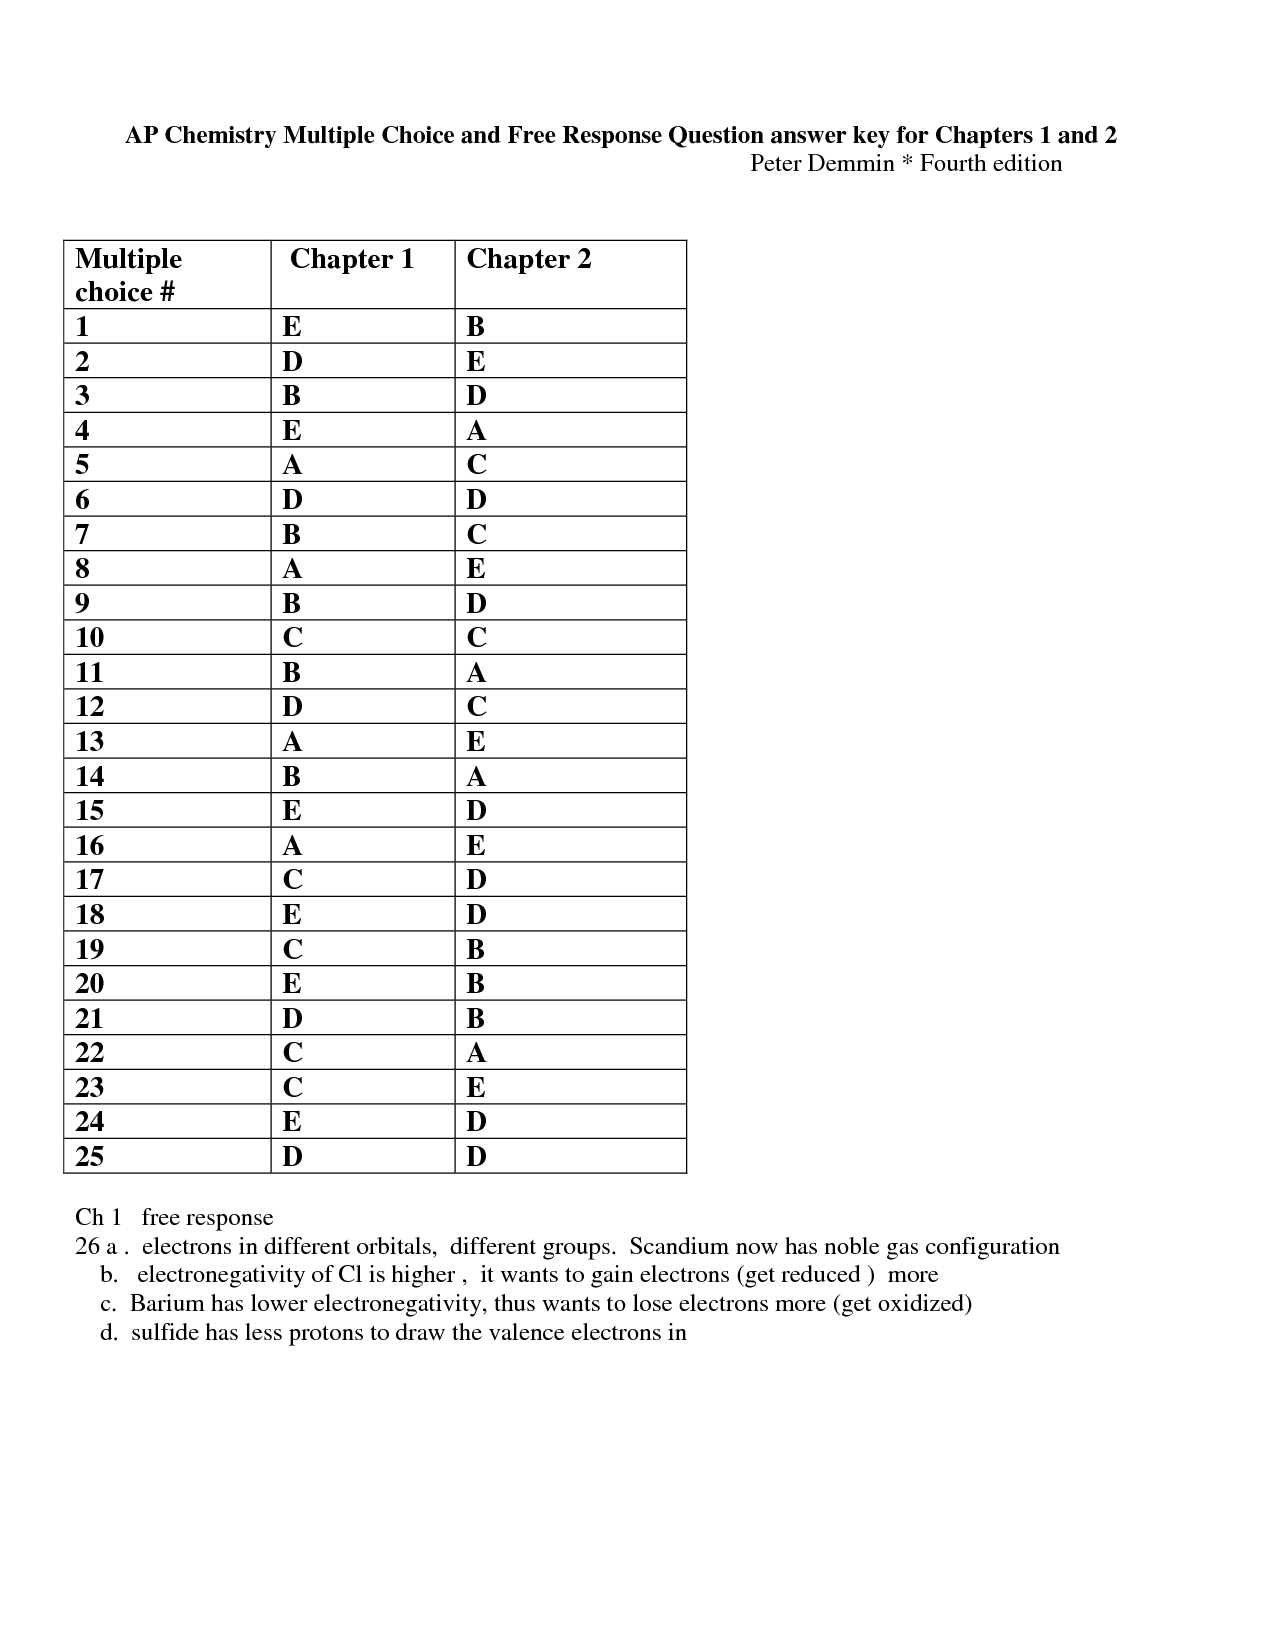 16-best-images-of-math-worksheet-5th-grade-conversion-pint-to-cups-measurement-conversion